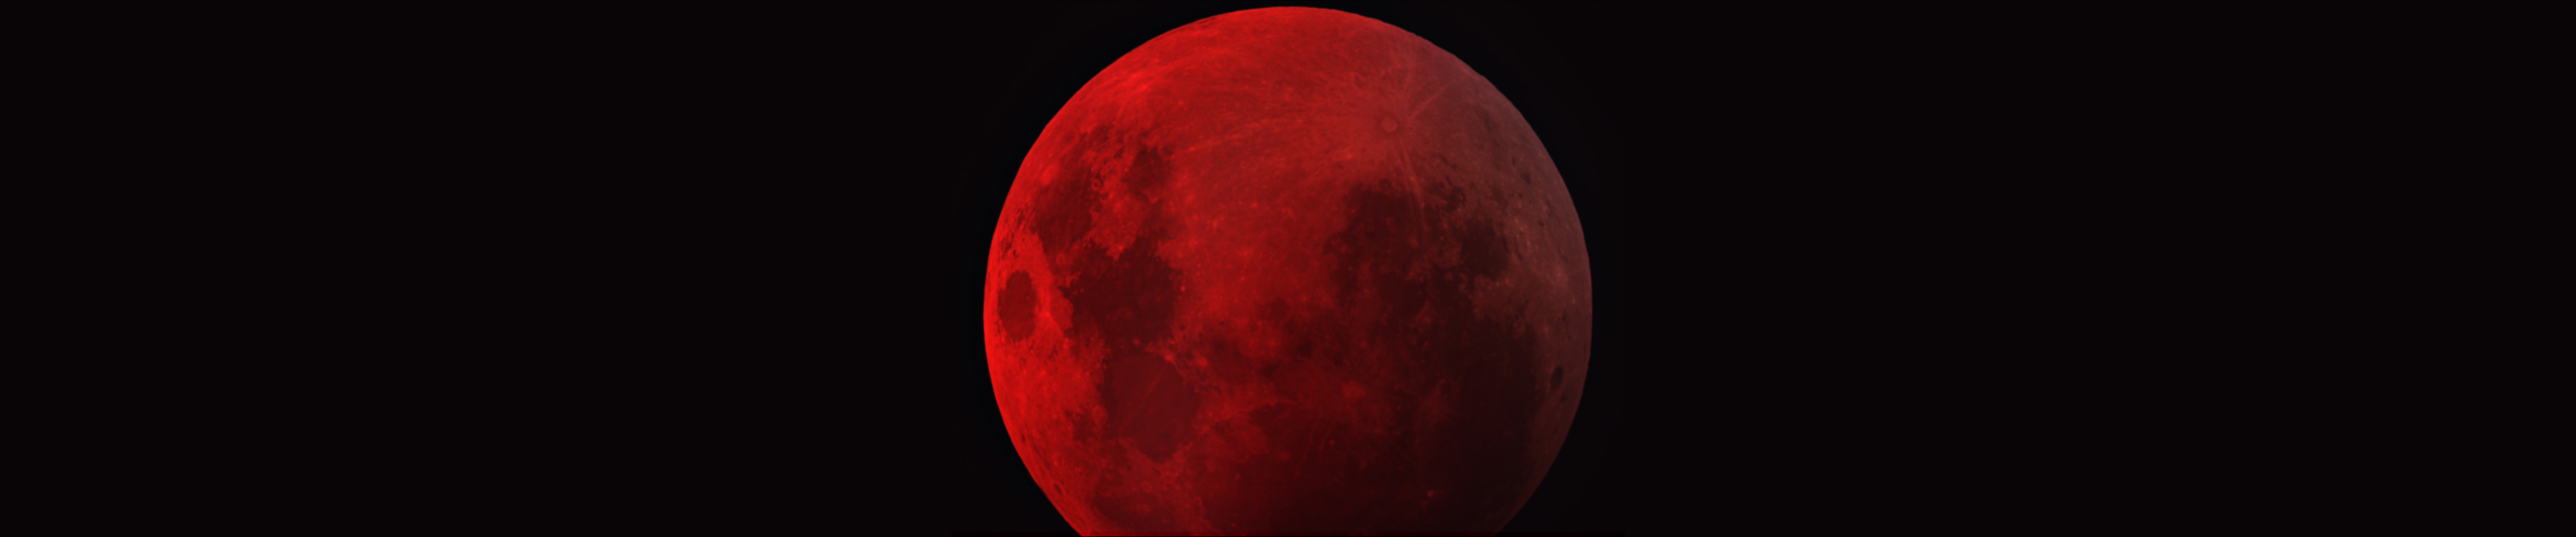 astronomy blood moon 5040x1050 HD Wallpaper   Space Planets 345647